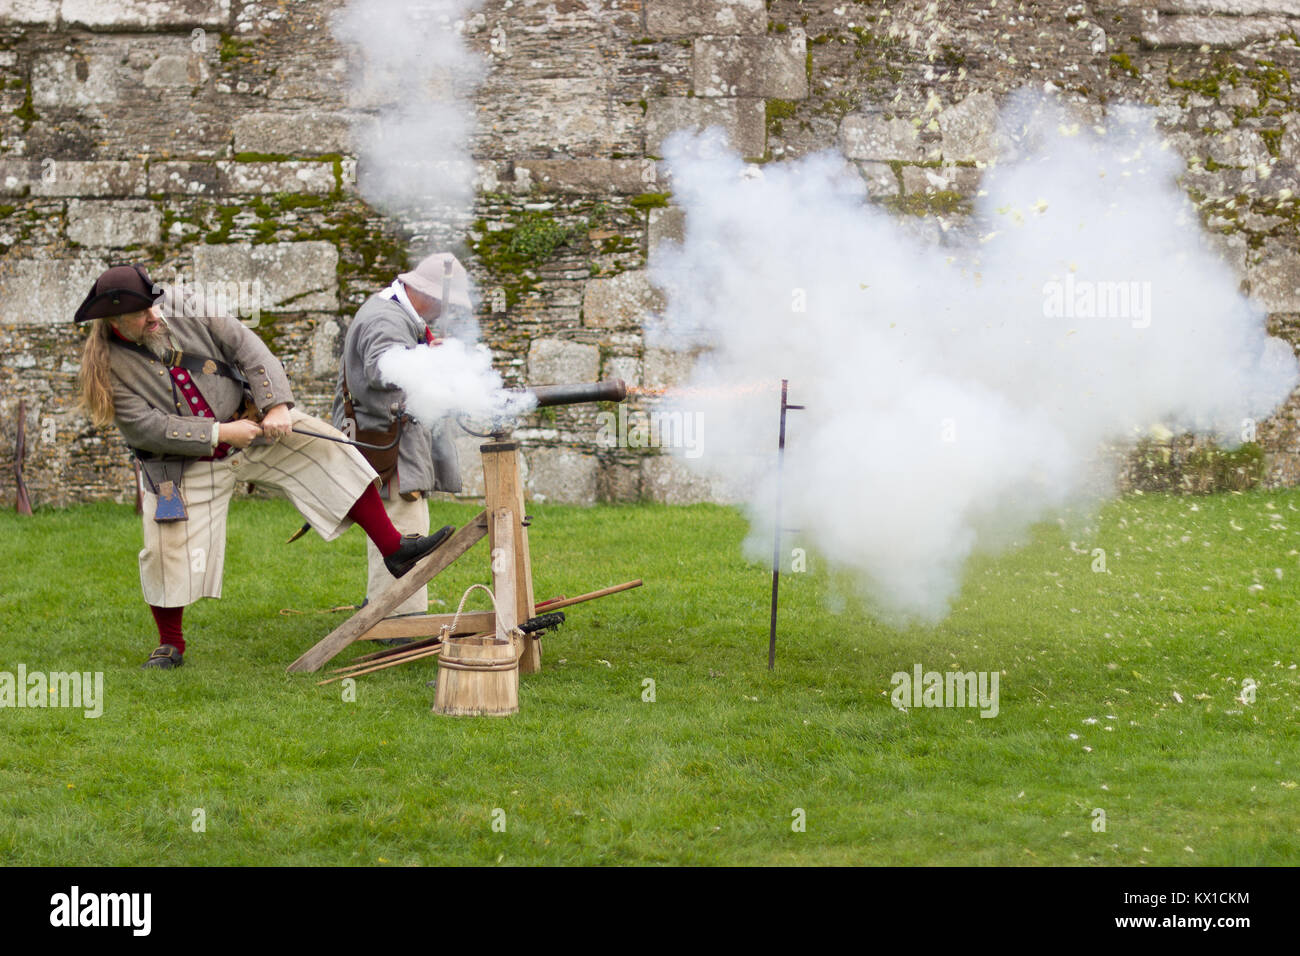 Pirates firing a gun at a Cabbage to demonstrate the power and force at Pendennis castle Stock Photo